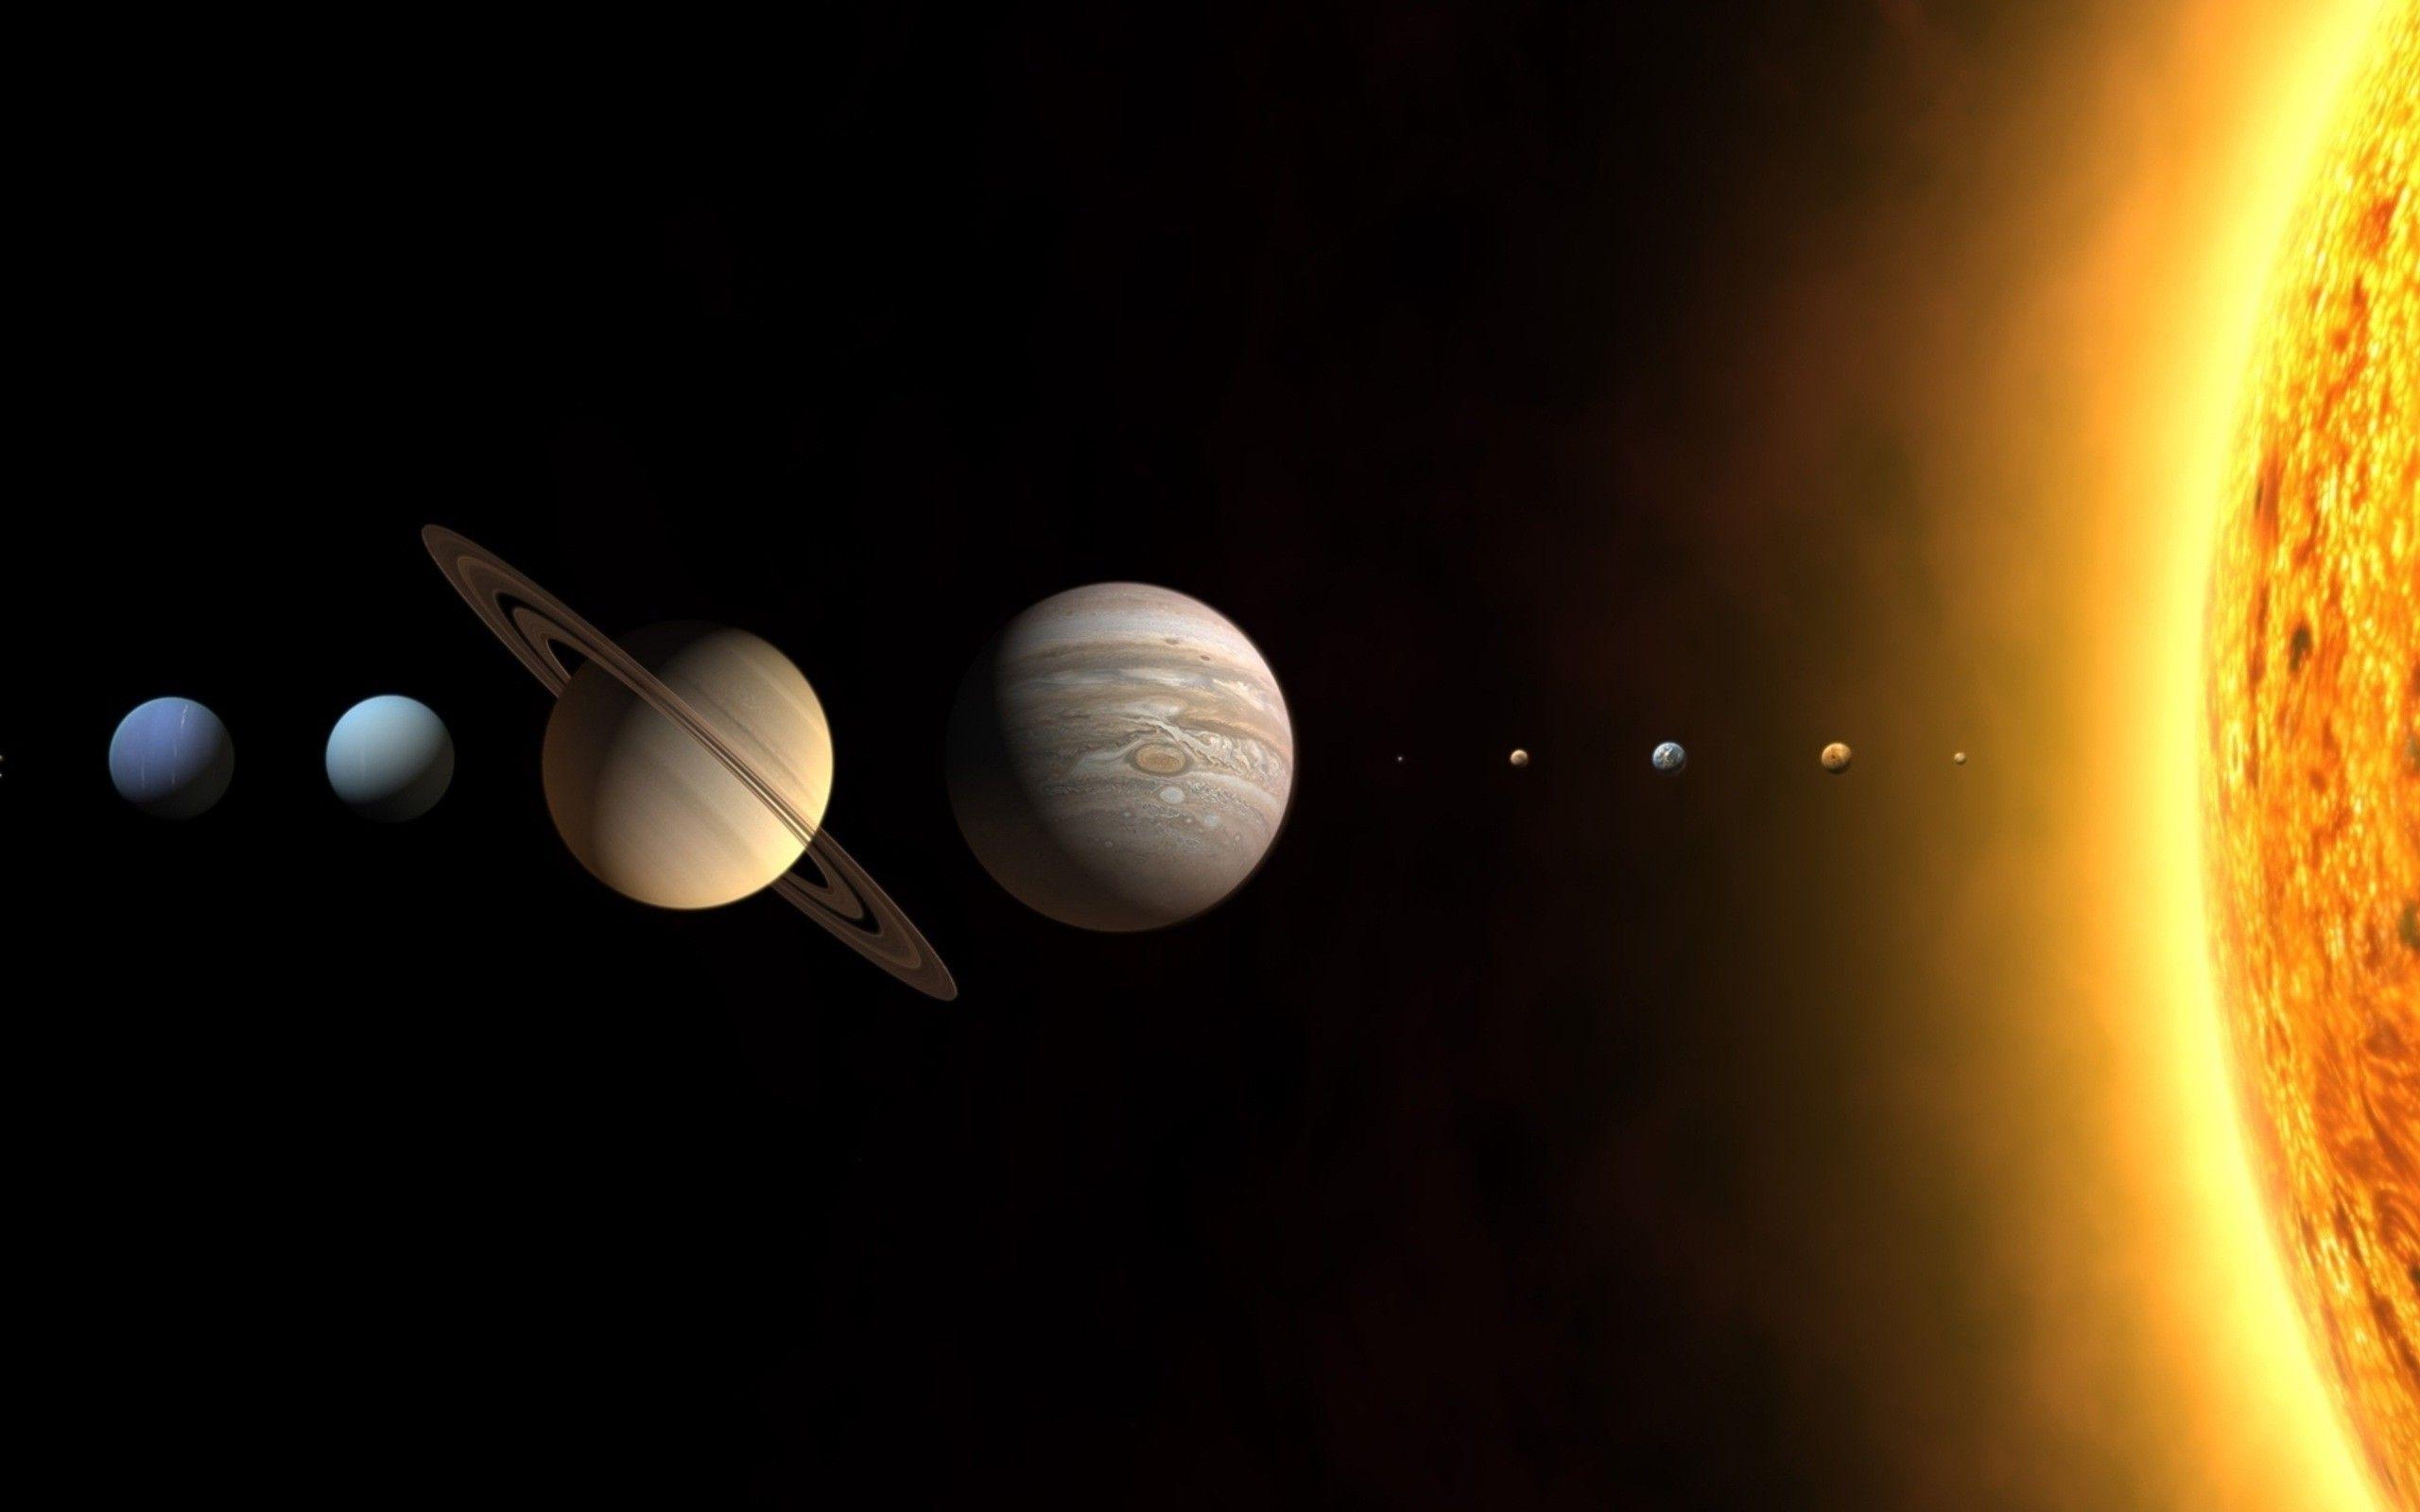 Solar System Planets Wallpapers Top Free Solar System Planets Backgrounds Wallpaperaccess 5918